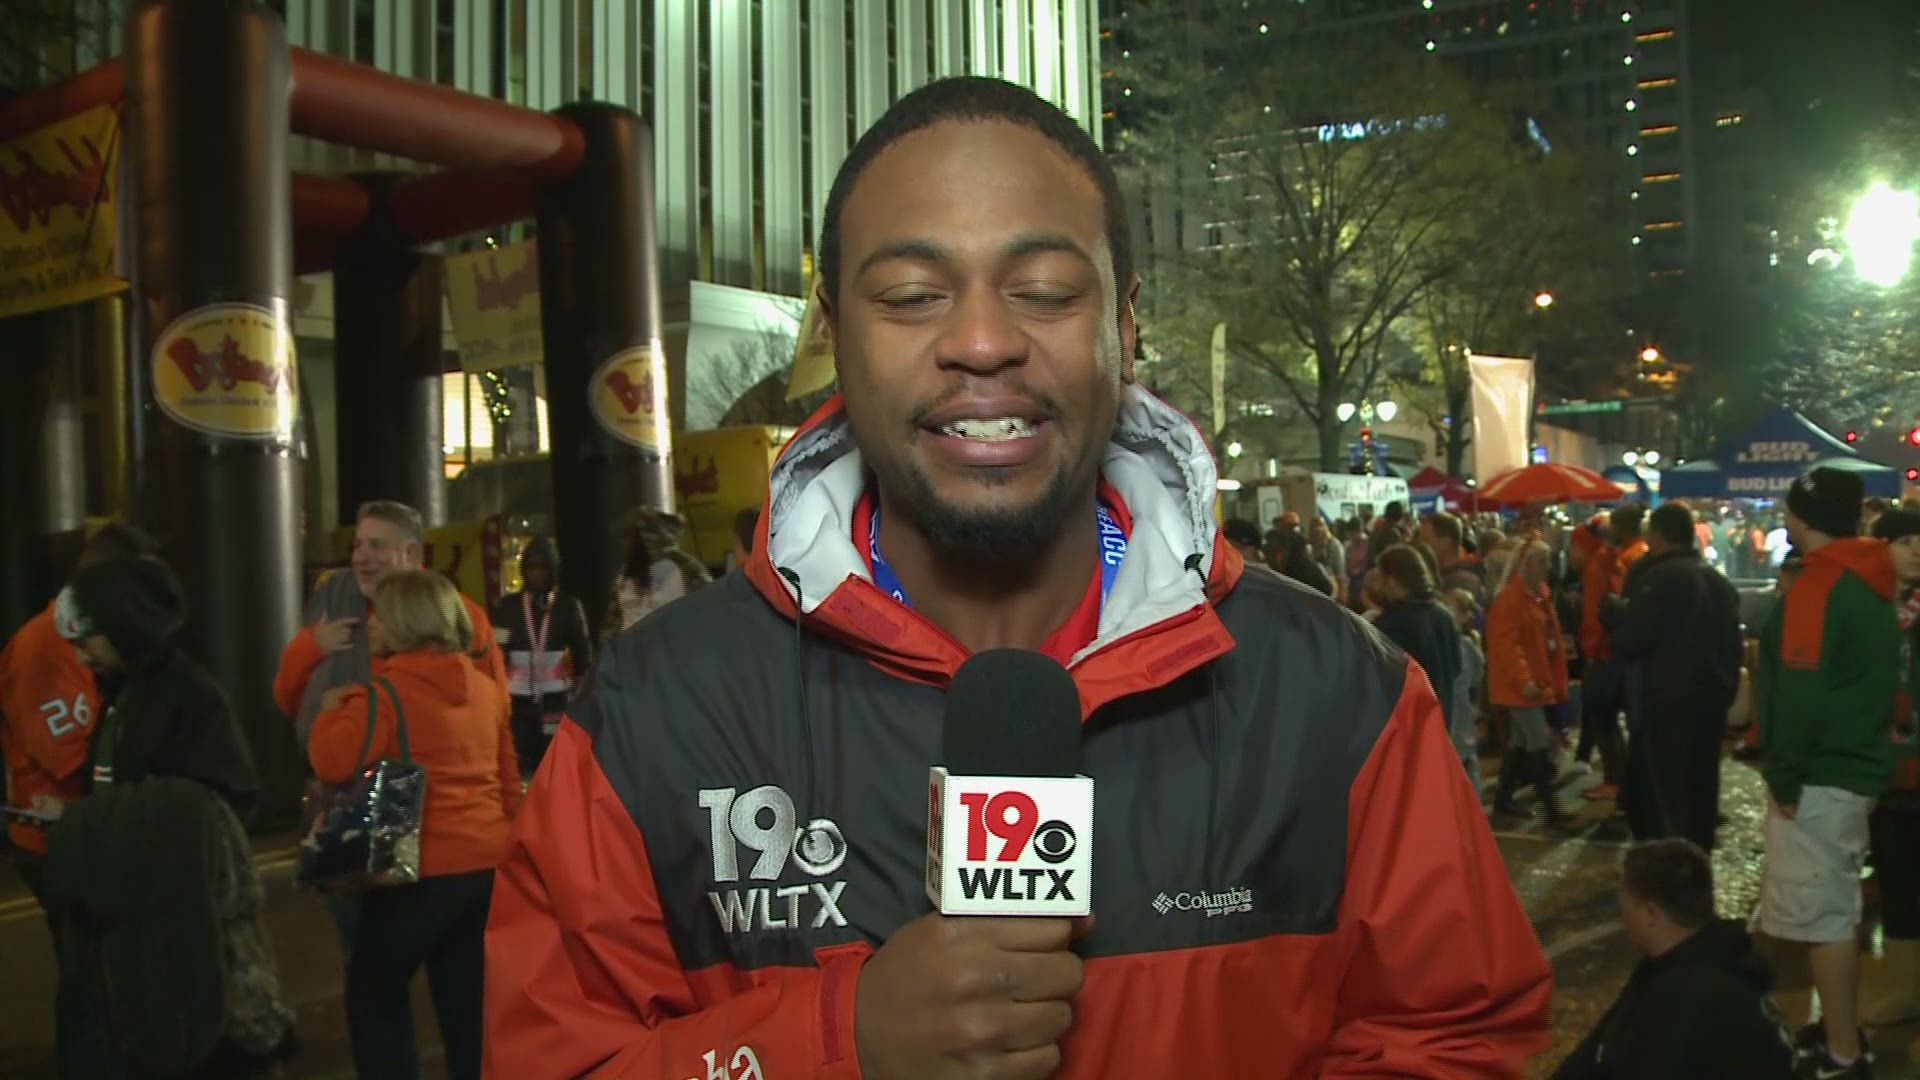 News 19's Joe Cook was in Charlotte for the ACC Championship game and caught up with some Tiger fans and they were confident about their team taking down the Hurricanes. They did 38-3 was the final as Clemson three-peats as ACC Champions.